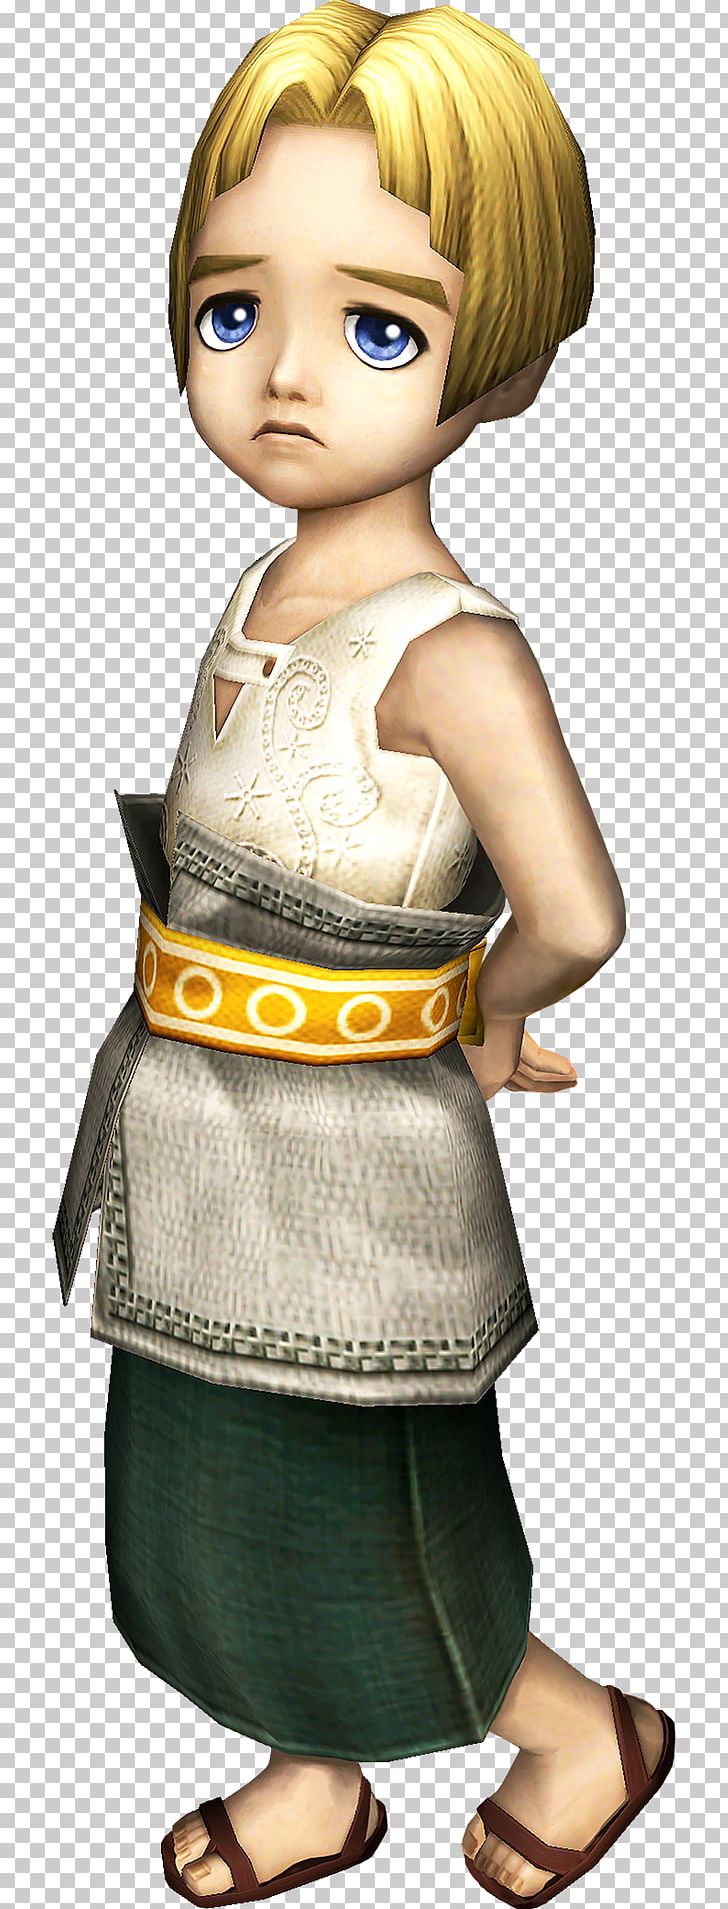 The Legend Of Zelda: Twilight Princess HD Link The Legend Of Zelda: The Wind Waker Hyrule Warriors PNG, Clipart, Brown Hair, Doll, Fictional Character, Game, Hyrule Warriors Free PNG Download